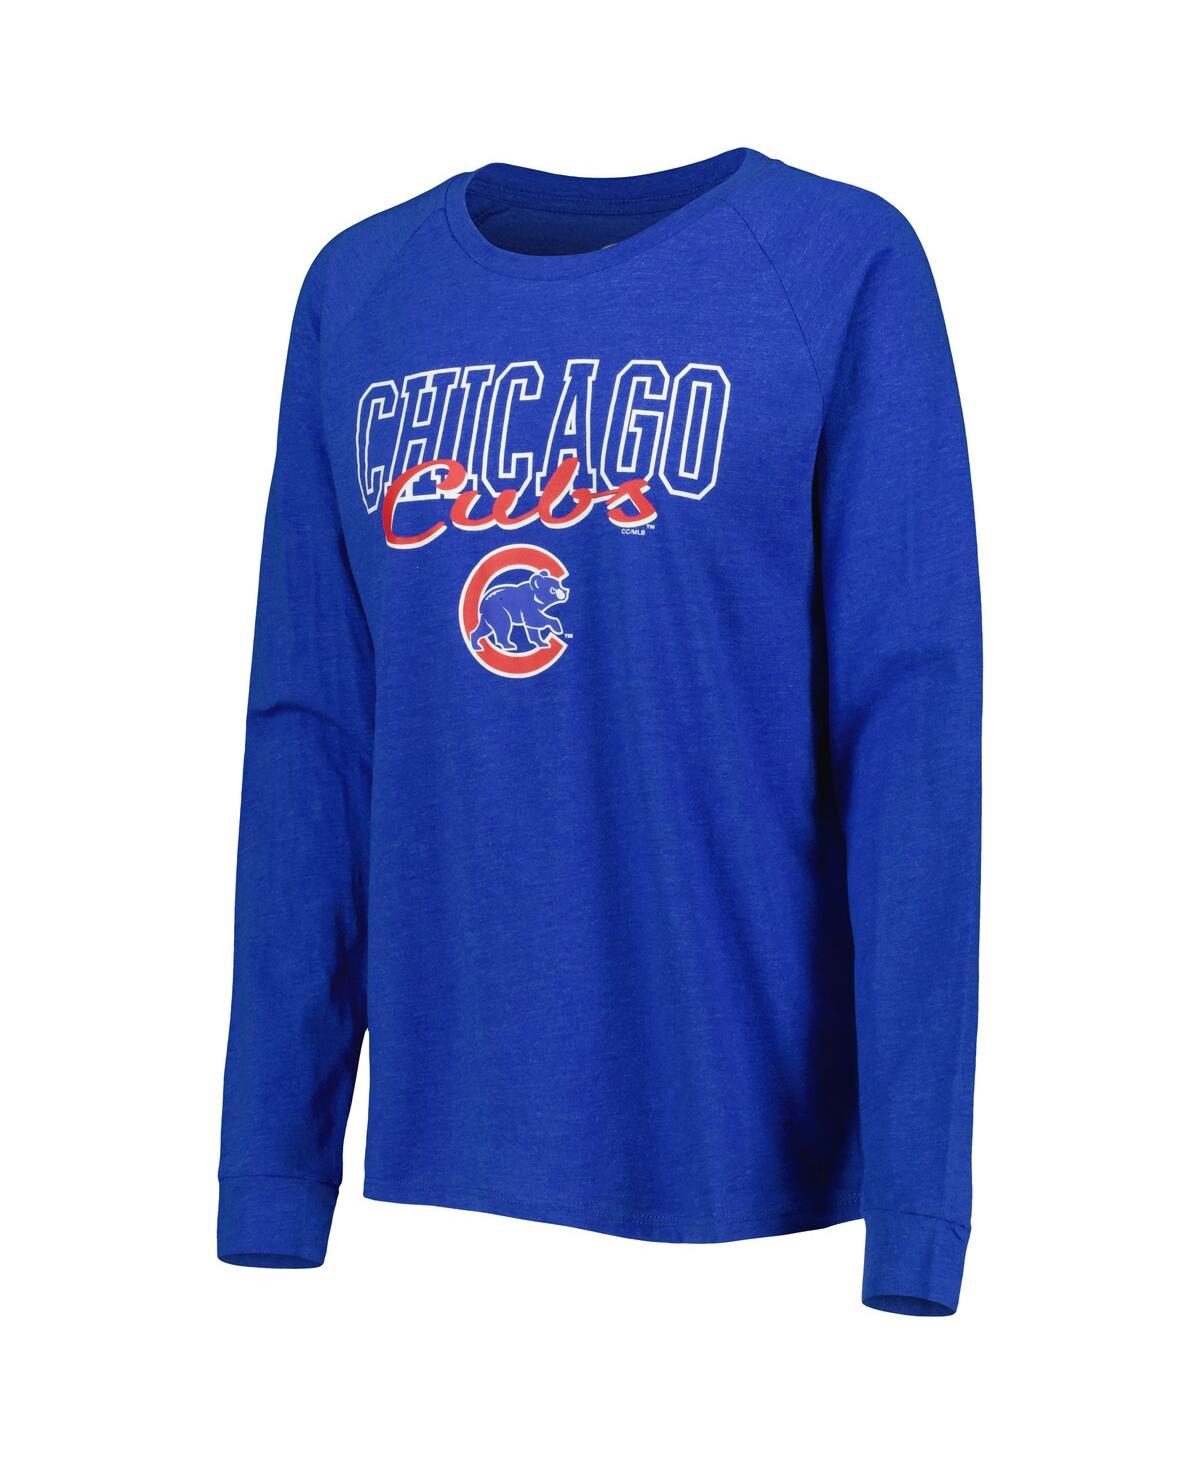 Shop Concepts Sport Women's  Heather Royal Chicago Cubs Meter Knit Raglan Long Sleeve T-shirt And Shorts S